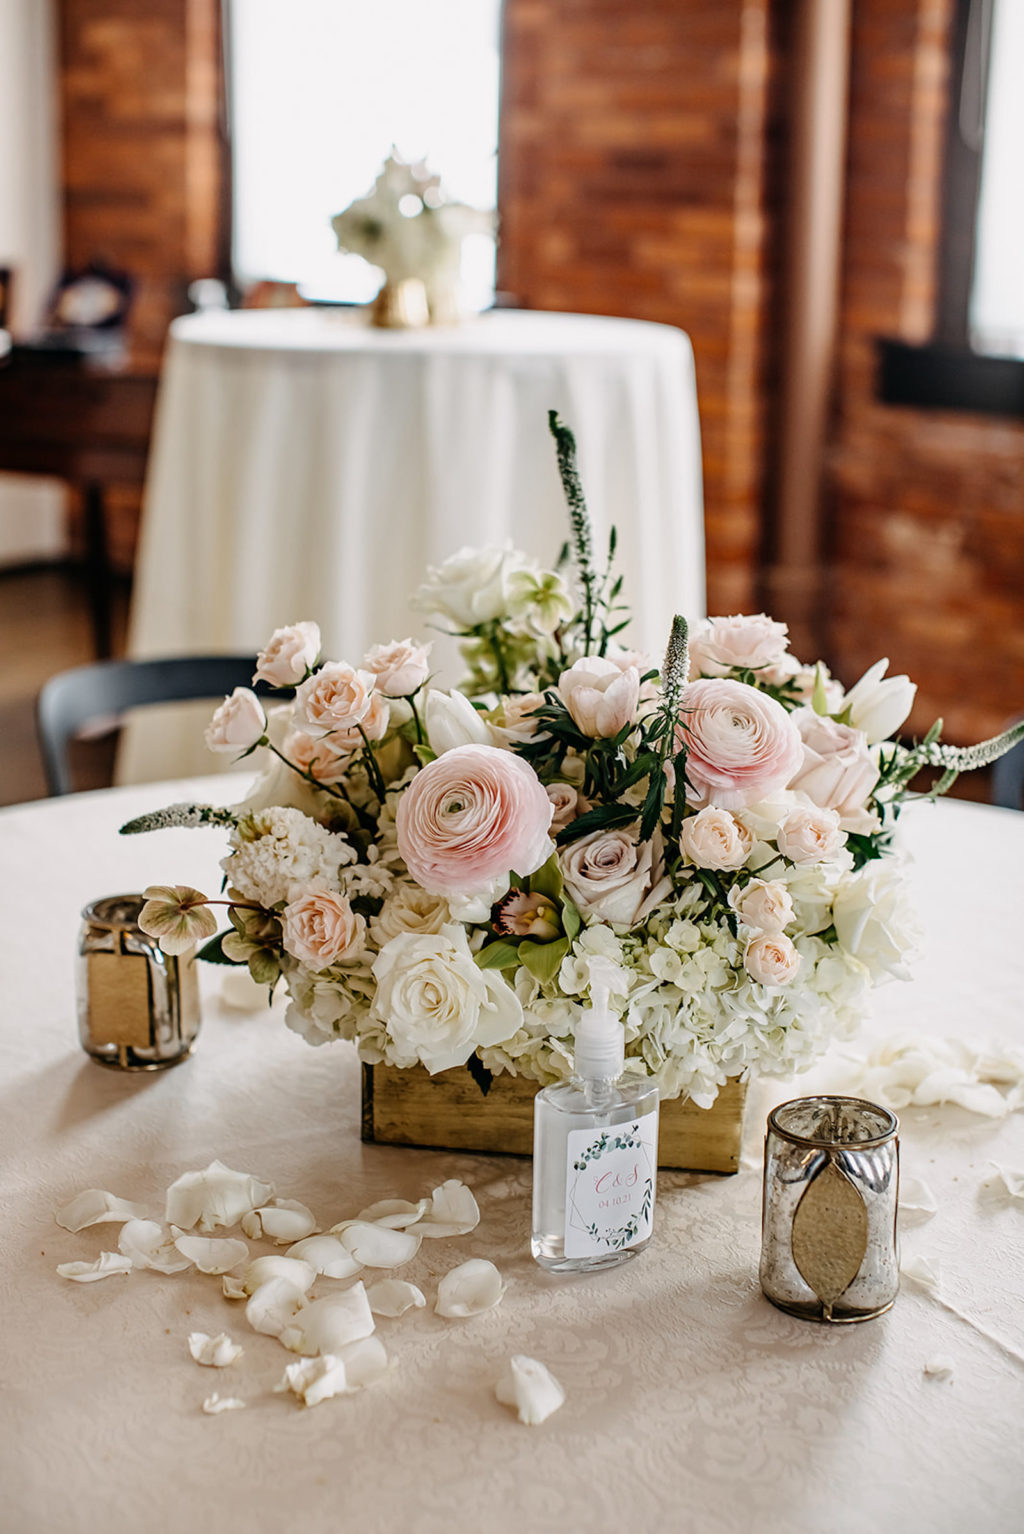 Vintage Inspired Florida Wedding Reception Decor, Exposed Brick Venue with Round Tables, White Linens, Low Floral Centerpieces, Blush Pink Peonies, Ivory Roses, Hydrangeas, Carnations, Wooden Flower Box, Two Tone Mercury Candle Votives, COVID 19 Safe Custom Hand Sanitizer, | Ybor Wedding Venue J.C. Newman Cigar Co.